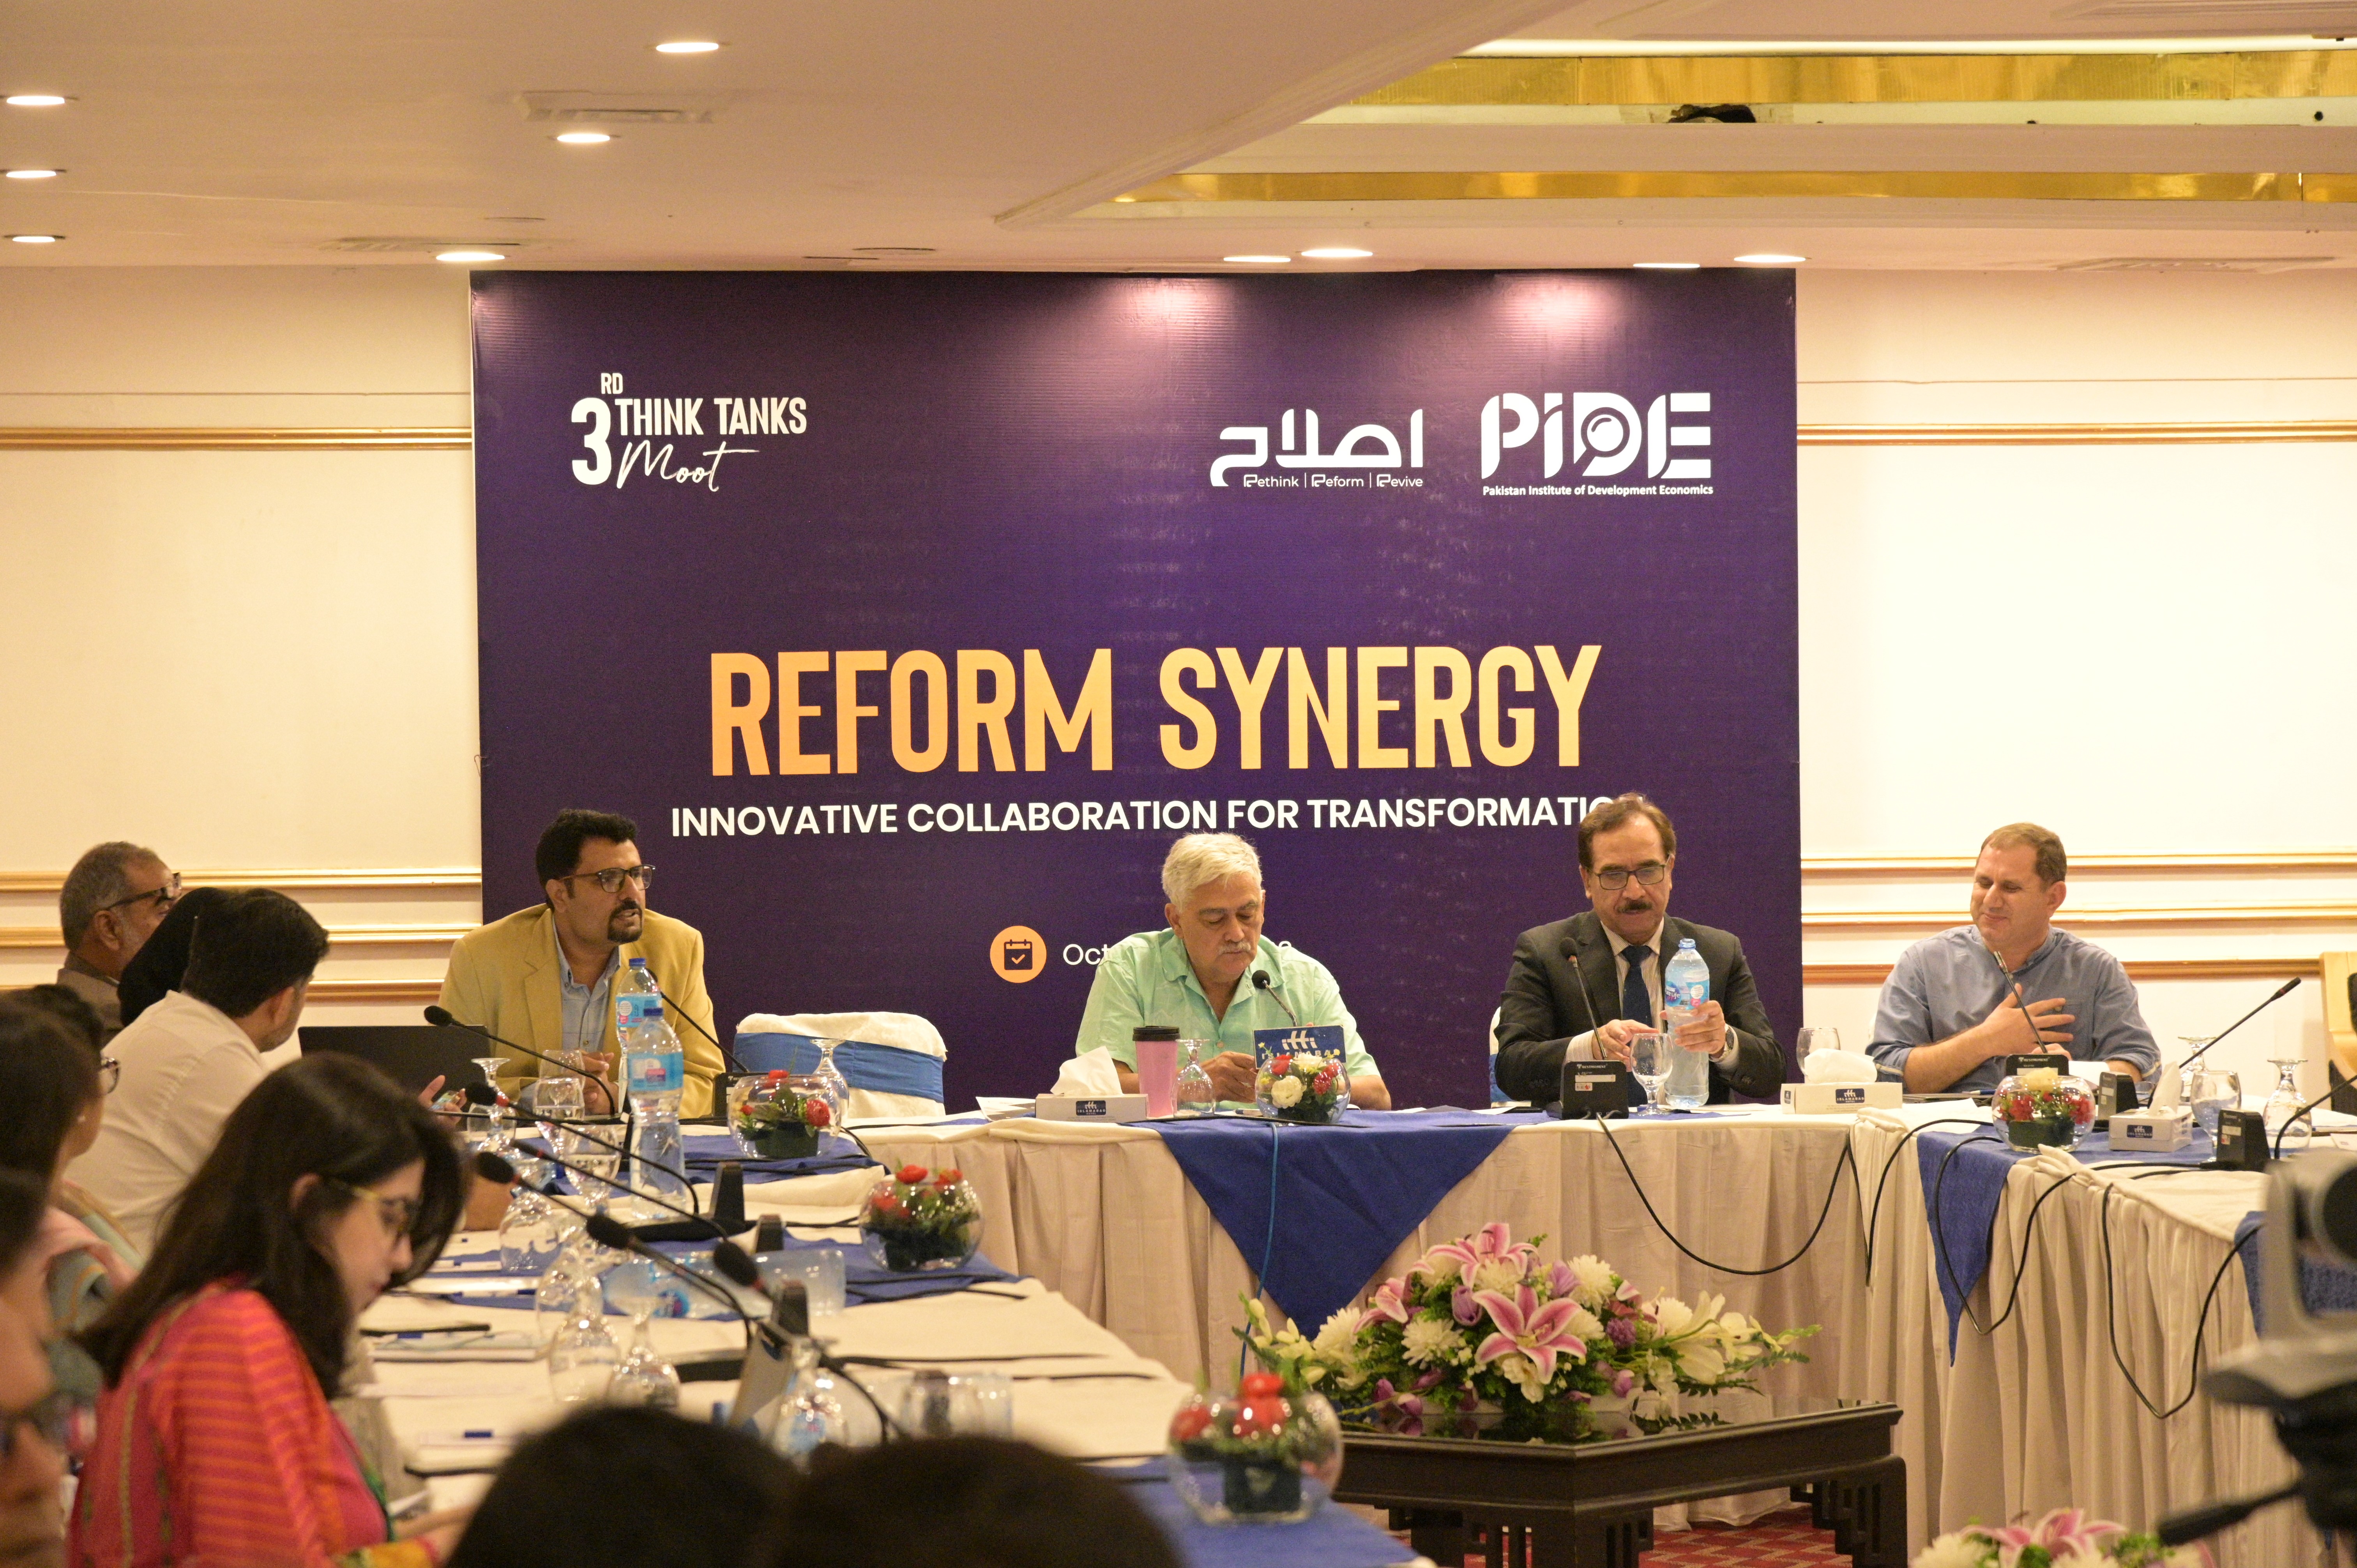 Panel Discussion on reform synergy organized by PIDE with a theme of innovative collaboration for transformation